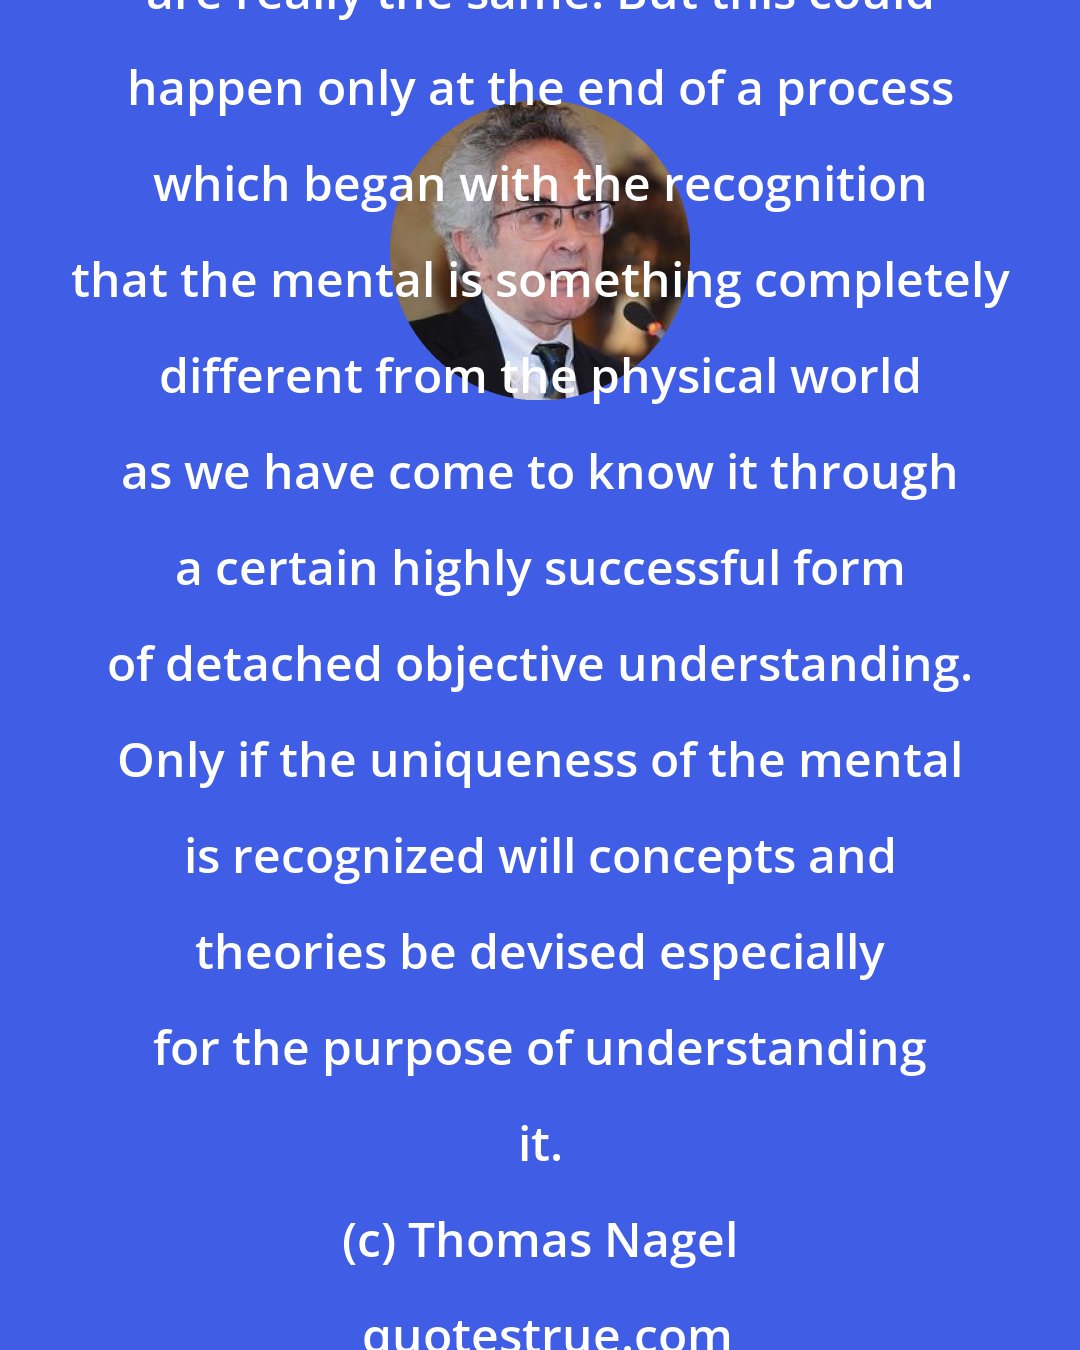 Thomas Nagel: If a psychological Maxwell devises a general theory of mind, he may make it possible for a psychological Einstein to follow with a theory that the mental and the physical are really the same. But this could happen only at the end of a process which began with the recognition that the mental is something completely different from the physical world as we have come to know it through a certain highly successful form of detached objective understanding. Only if the uniqueness of the mental is recognized will concepts and theories be devised especially for the purpose of understanding it.